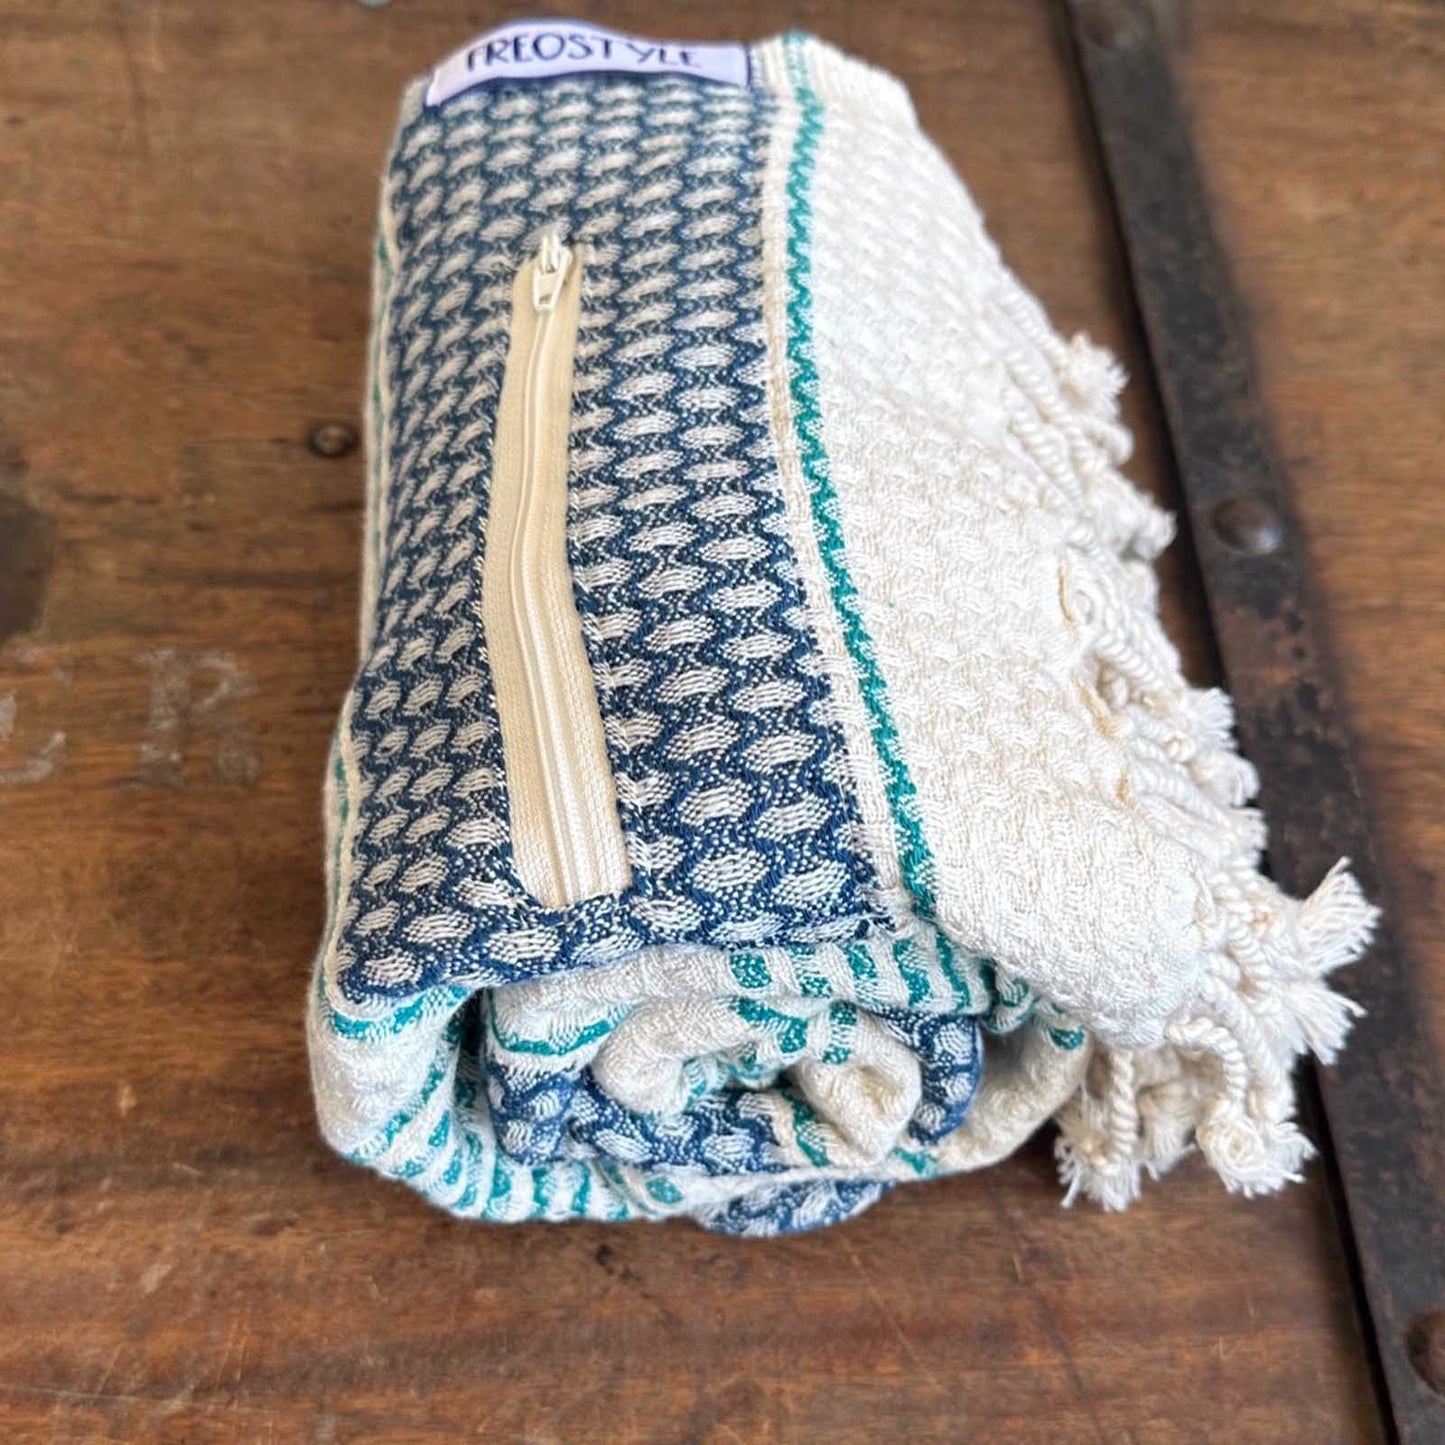 Como Turkish Towel with Pockets, by FReostyle, rolled